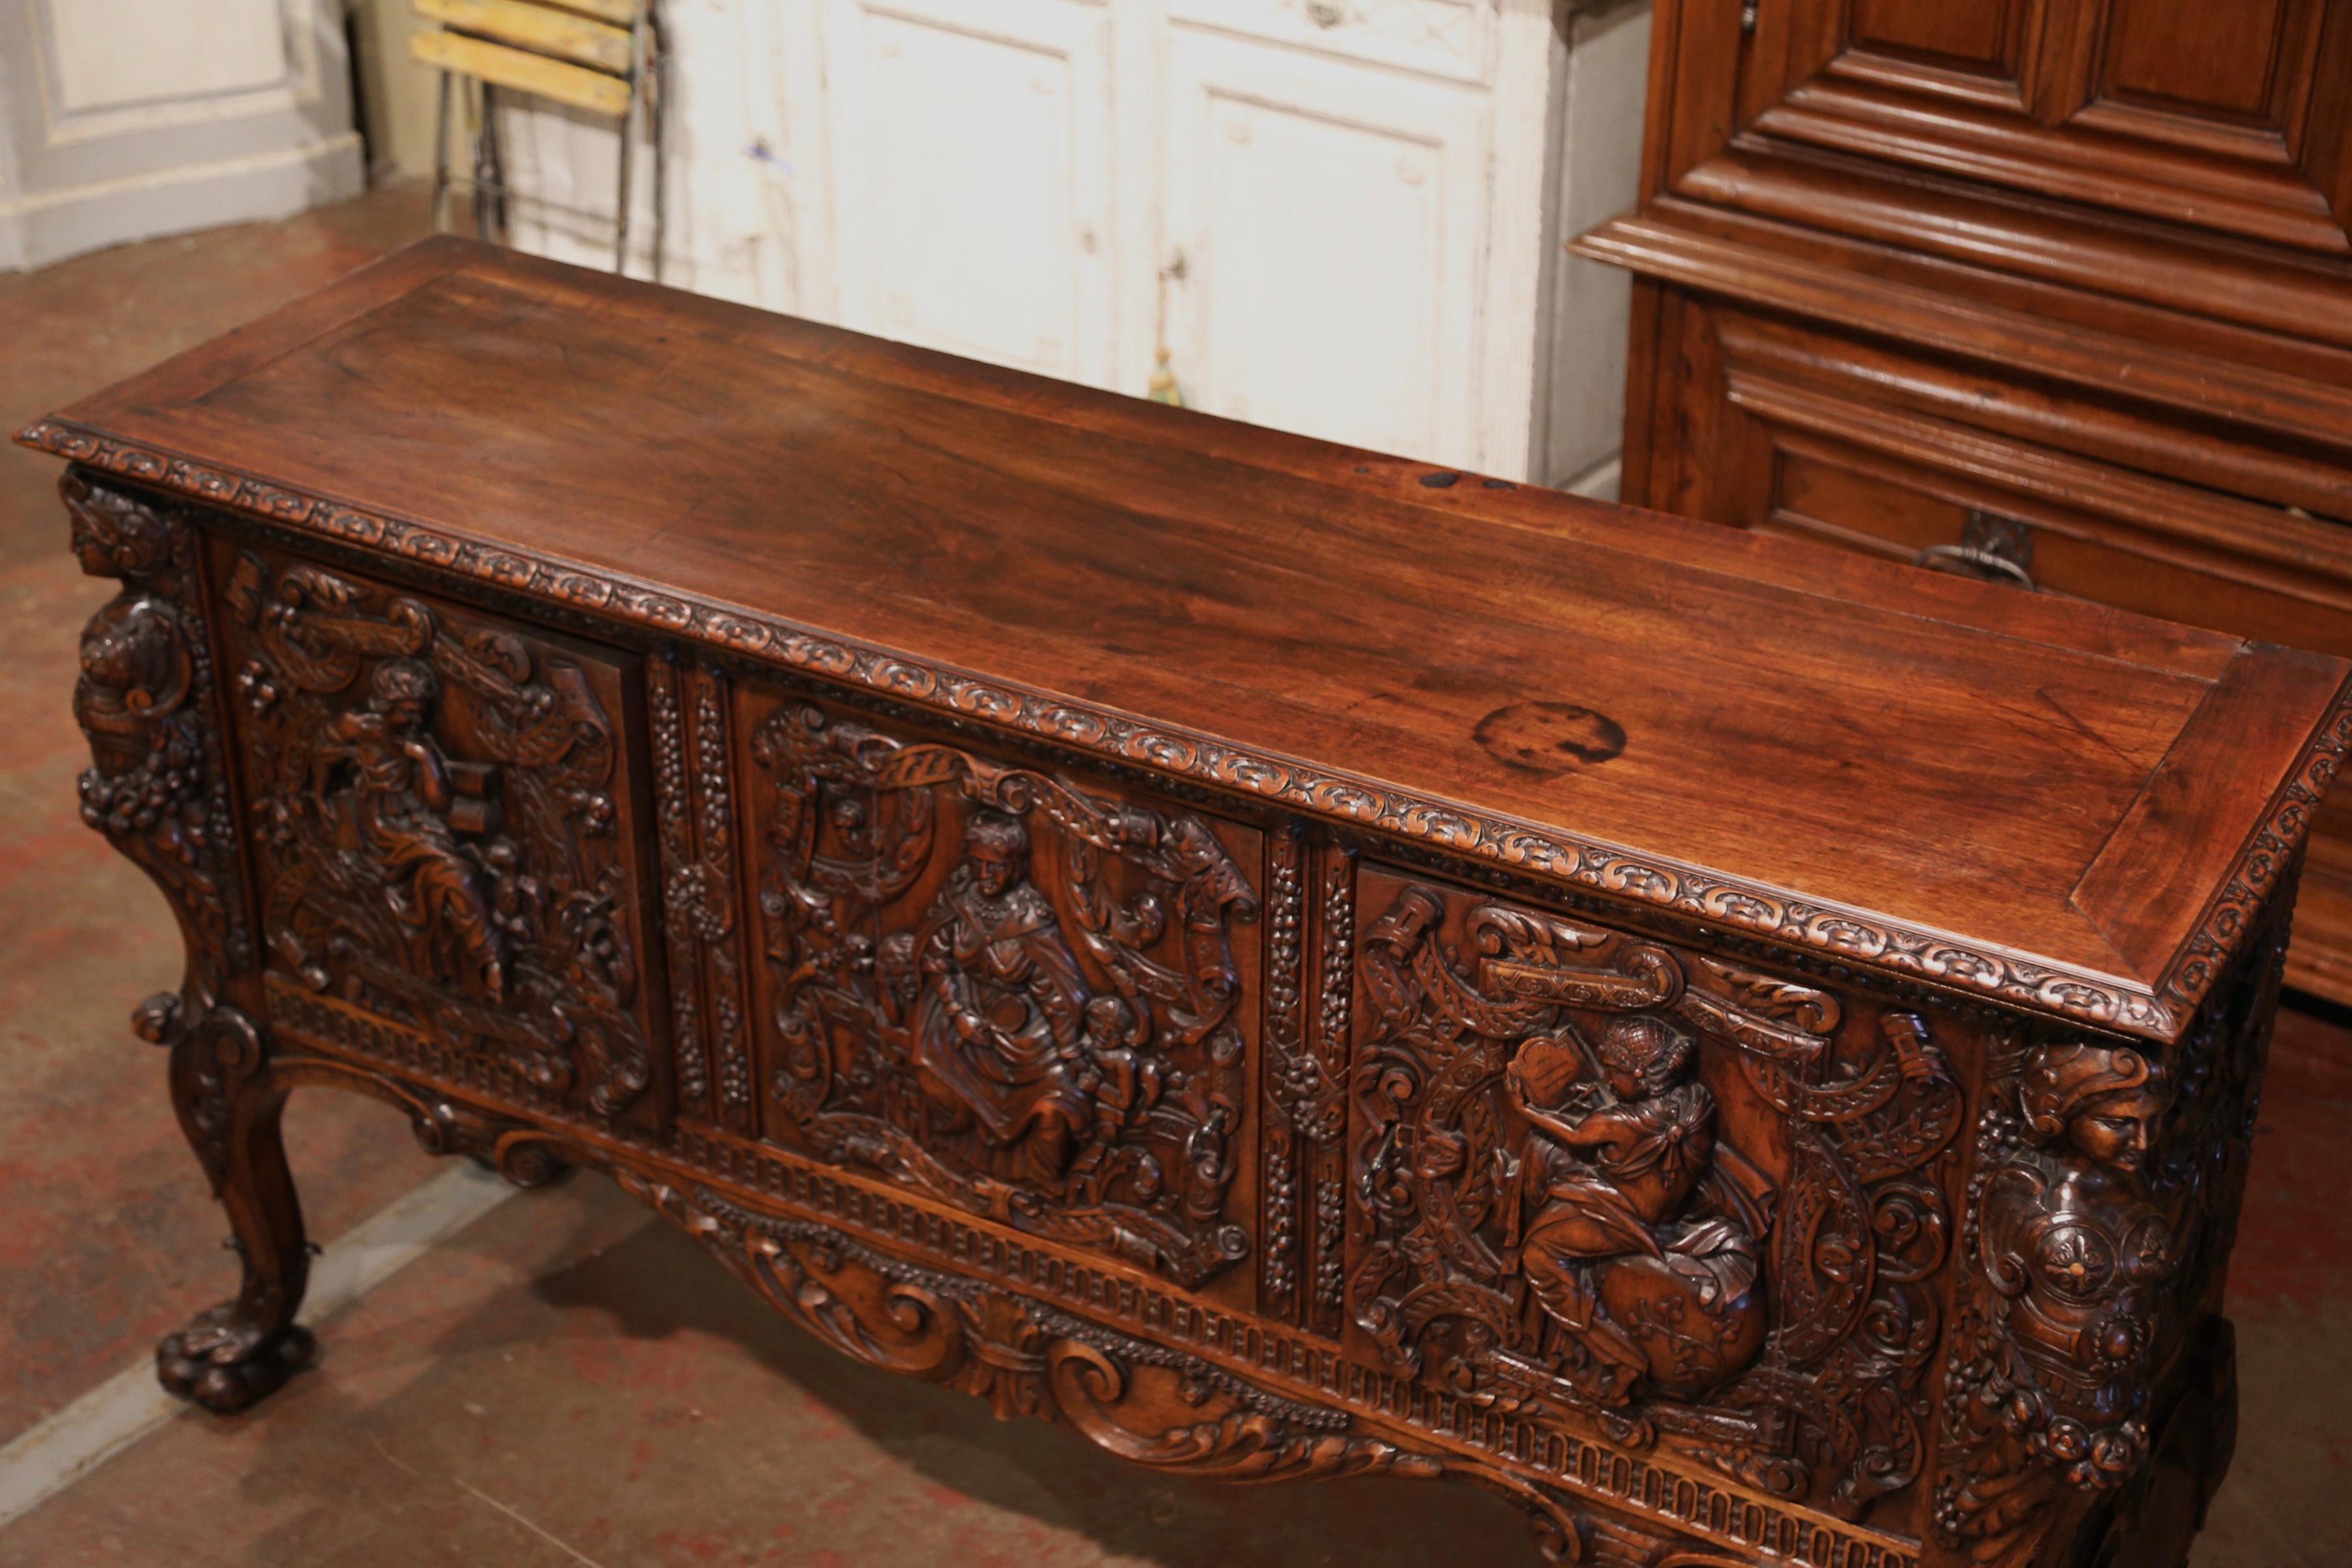 Hand-Carved Mid-19th Century Italian Renaissance Hand Carved Walnut Credenza Cabinet For Sale